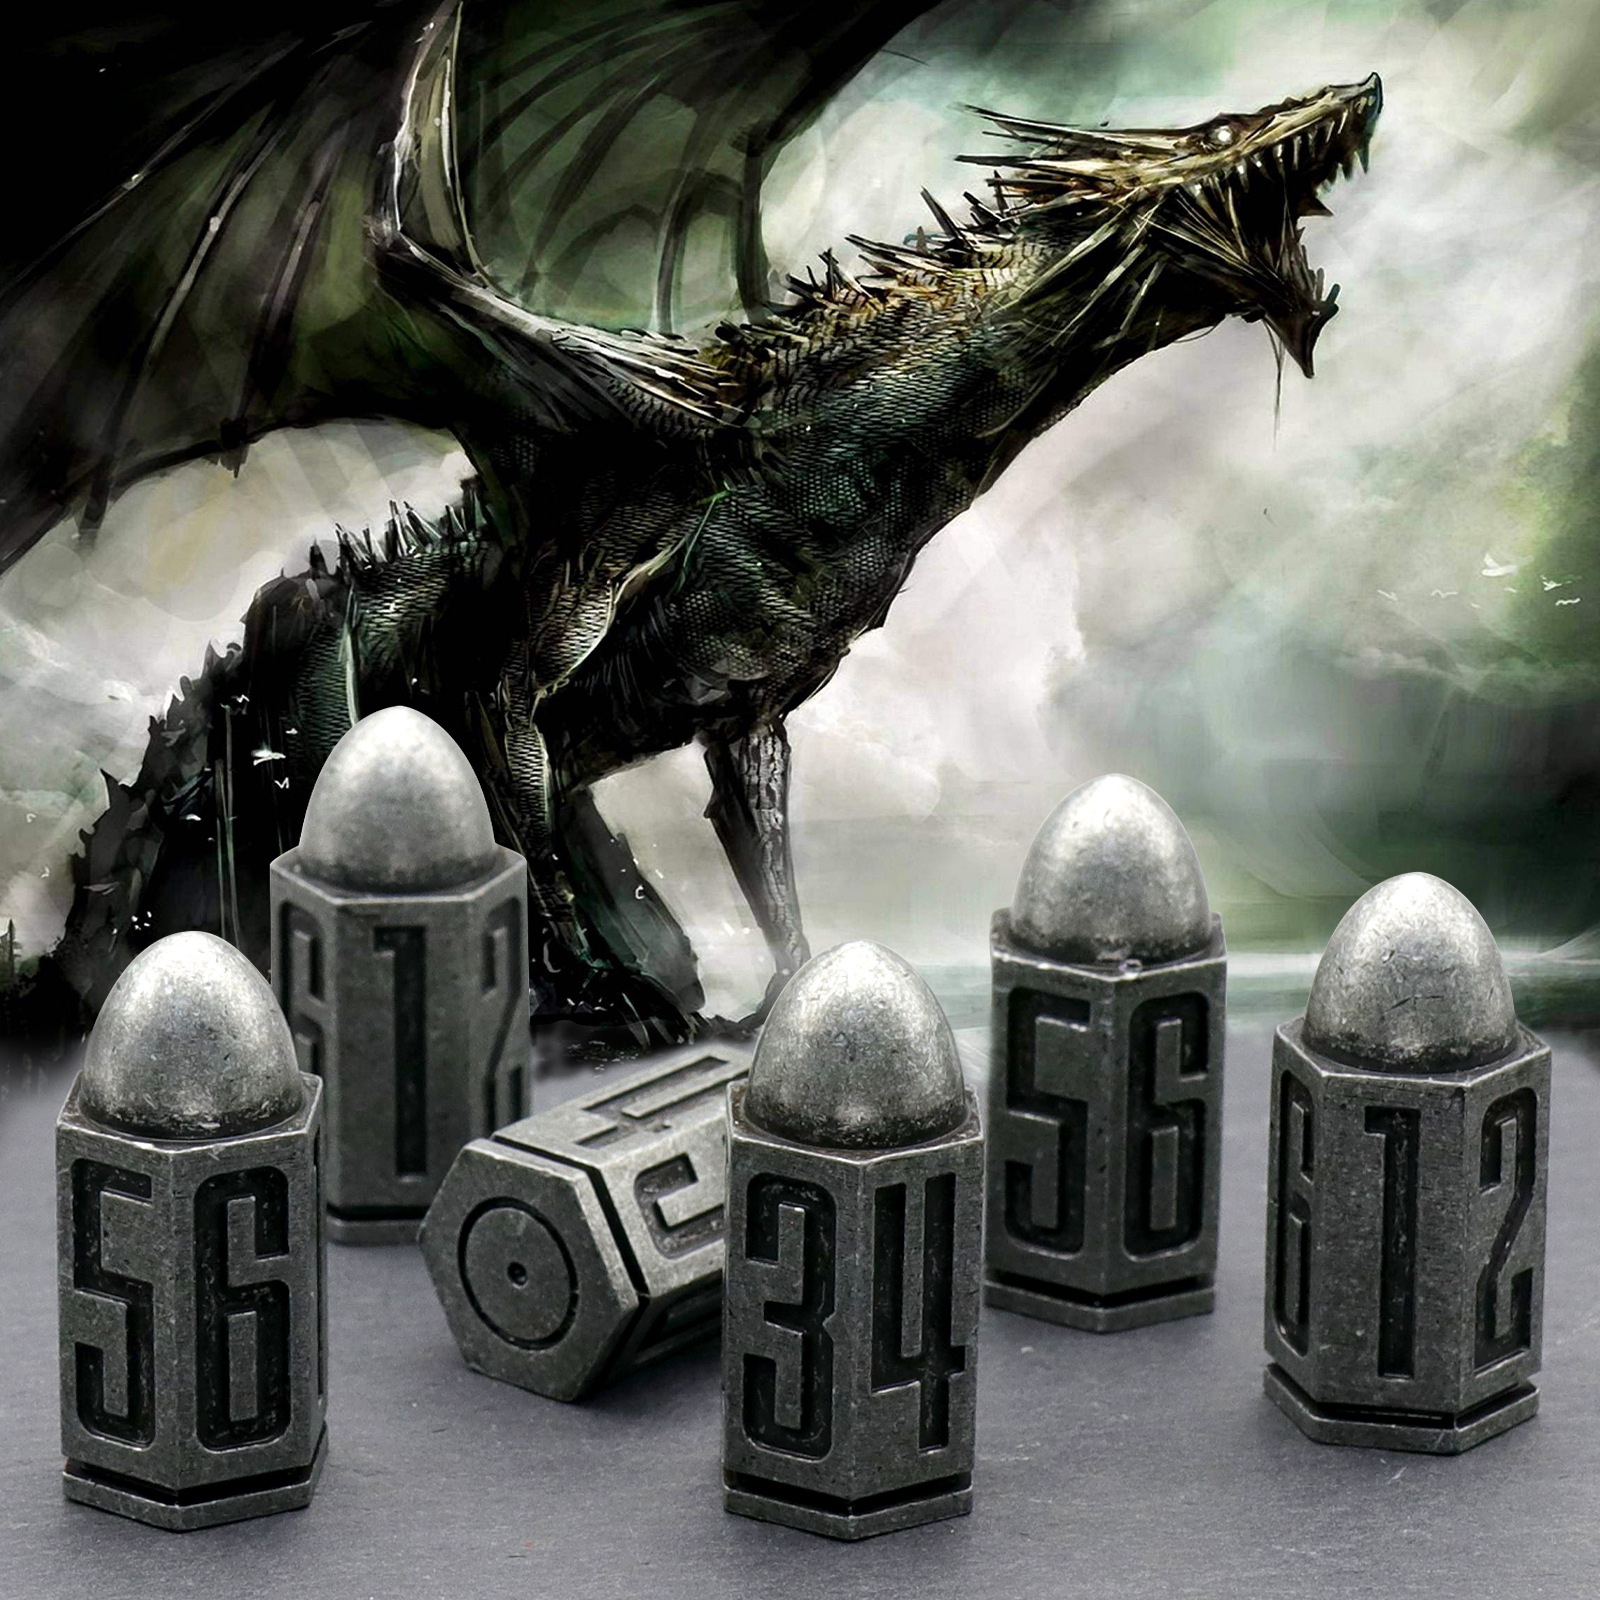 Cross-Border Board Game Running Group Metal Dice Dice Dice Script Kill DND Dragon and Underground City Props D20 G Sulu